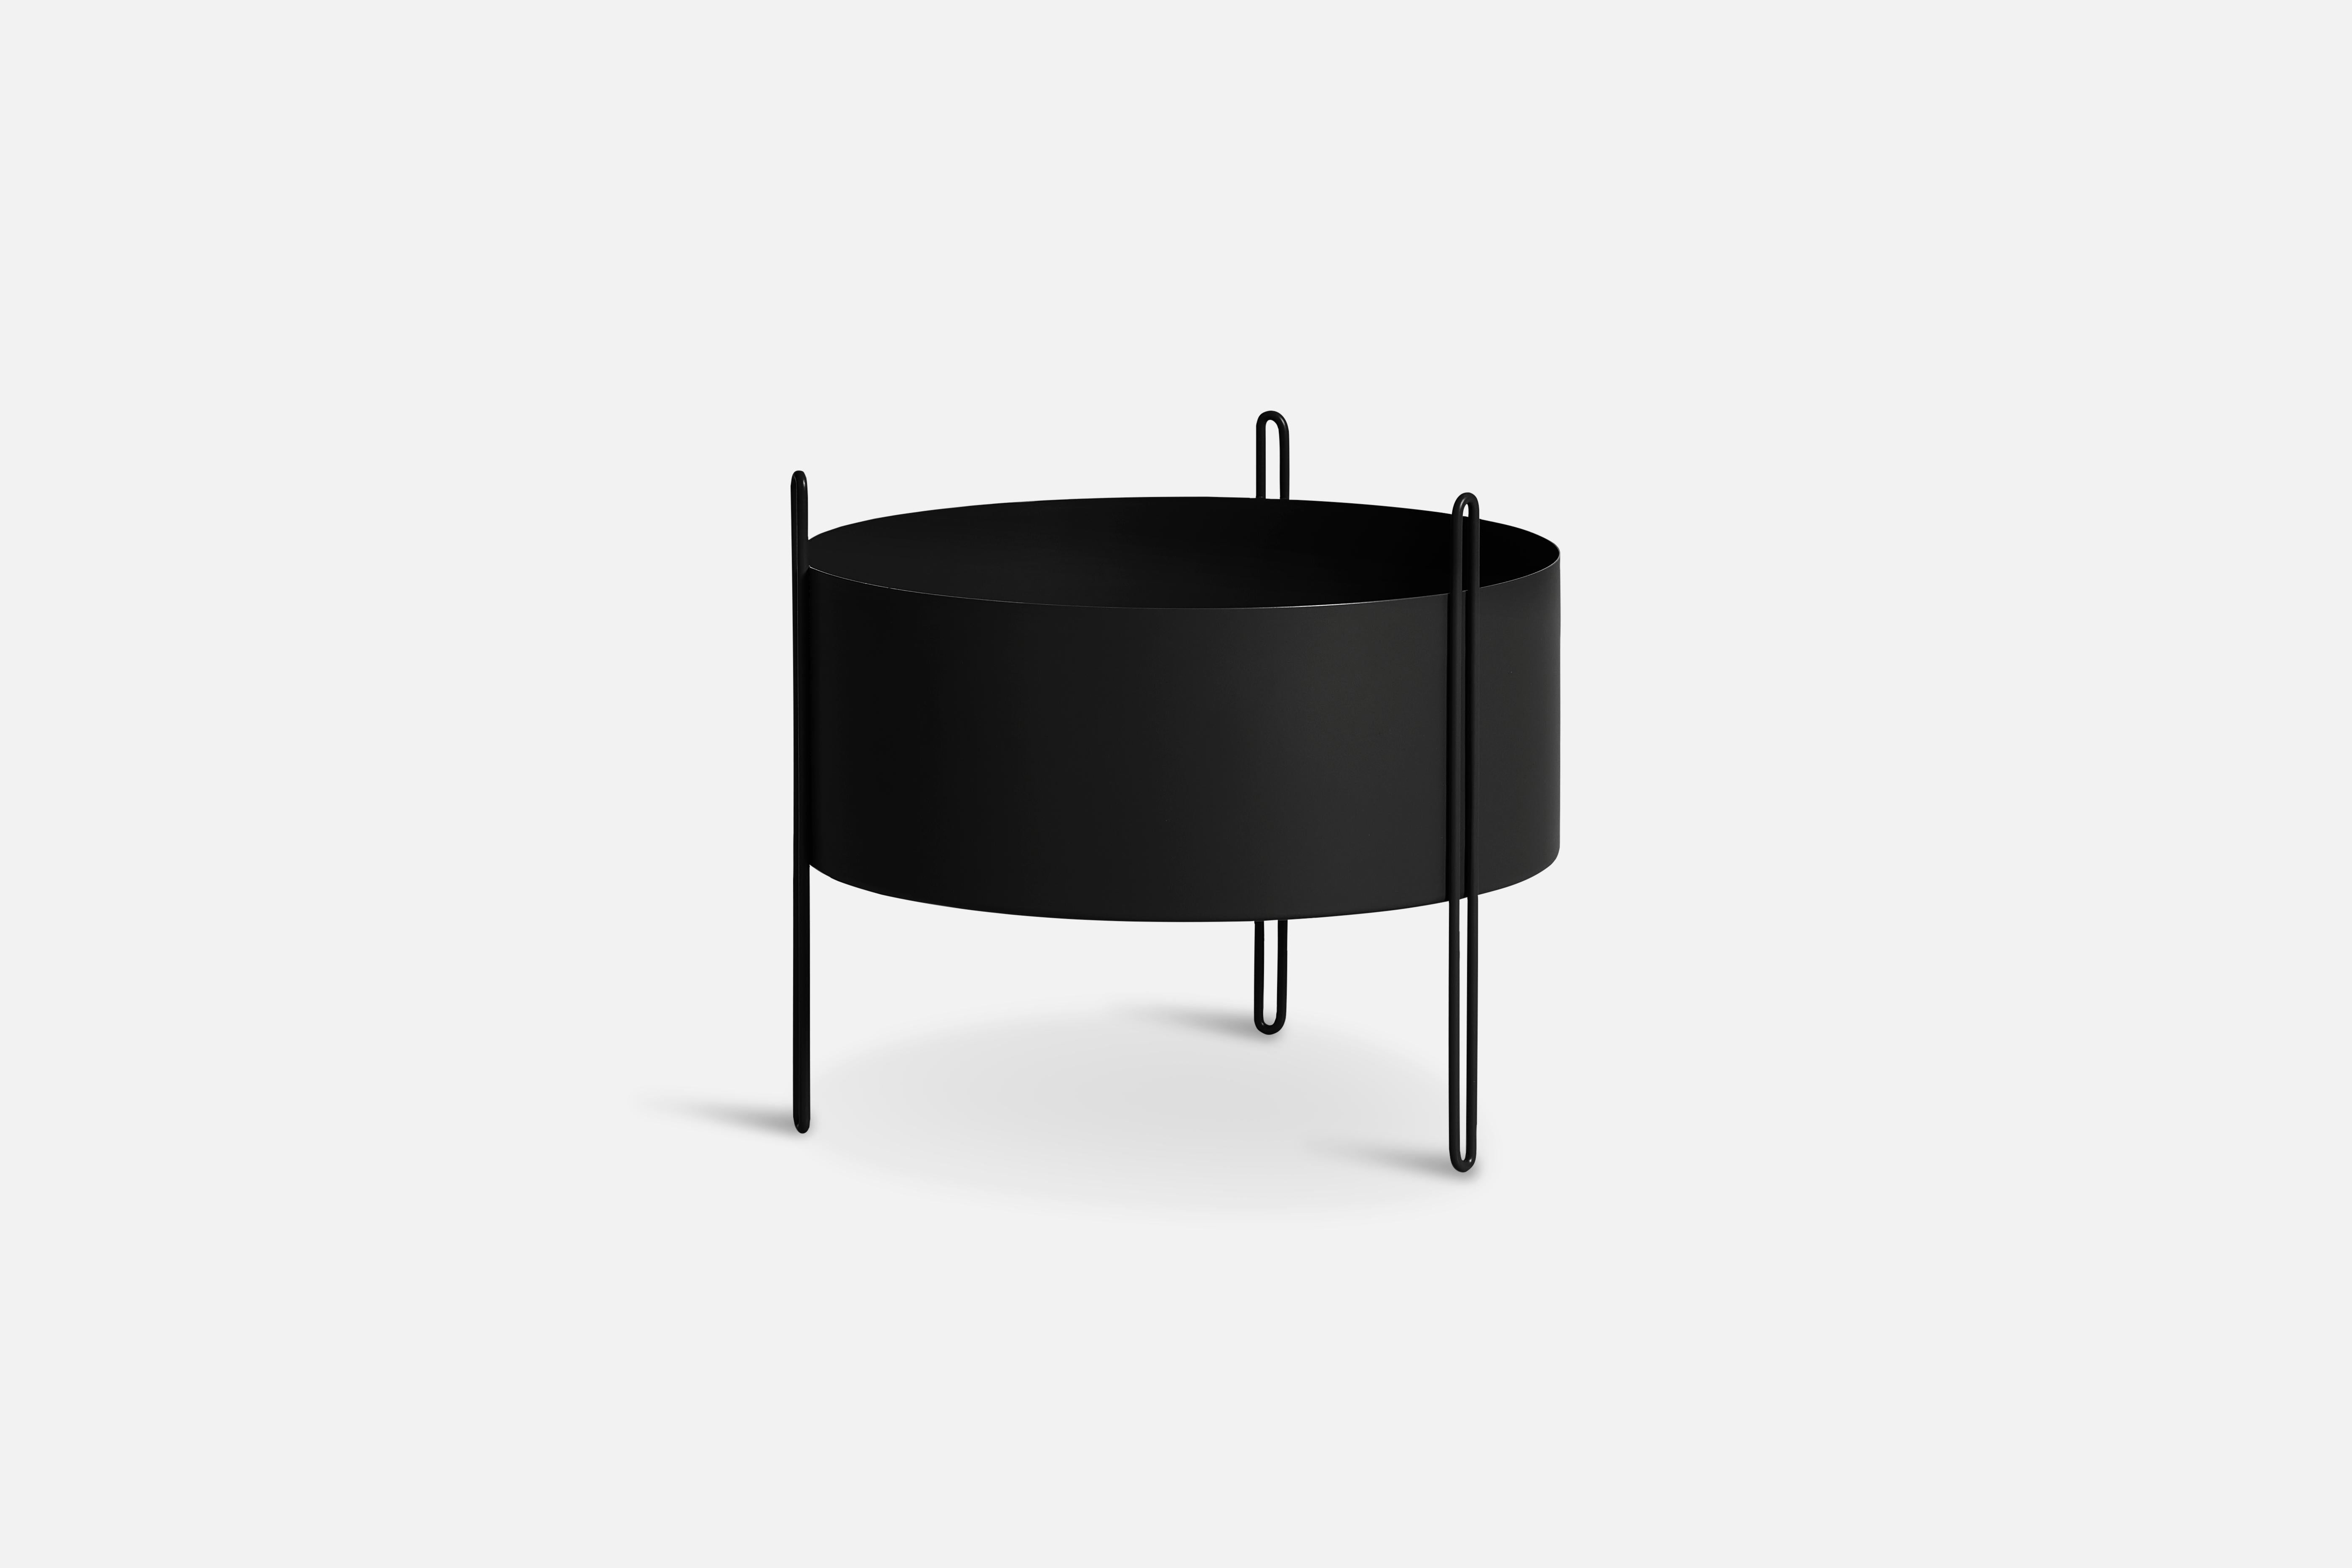 Medium black Pidestall planter by Emilie Stahl Carlsen.
Materials: metal.
Dimensions: D 40 x H 35 cm.
Available in grey, taupe or black and in 3 sizes: D 15 x H 15, D 40 x H 35, D 40 x H 55 cm.

Emilie Stahl Carlsen is a Nor wegian designer who